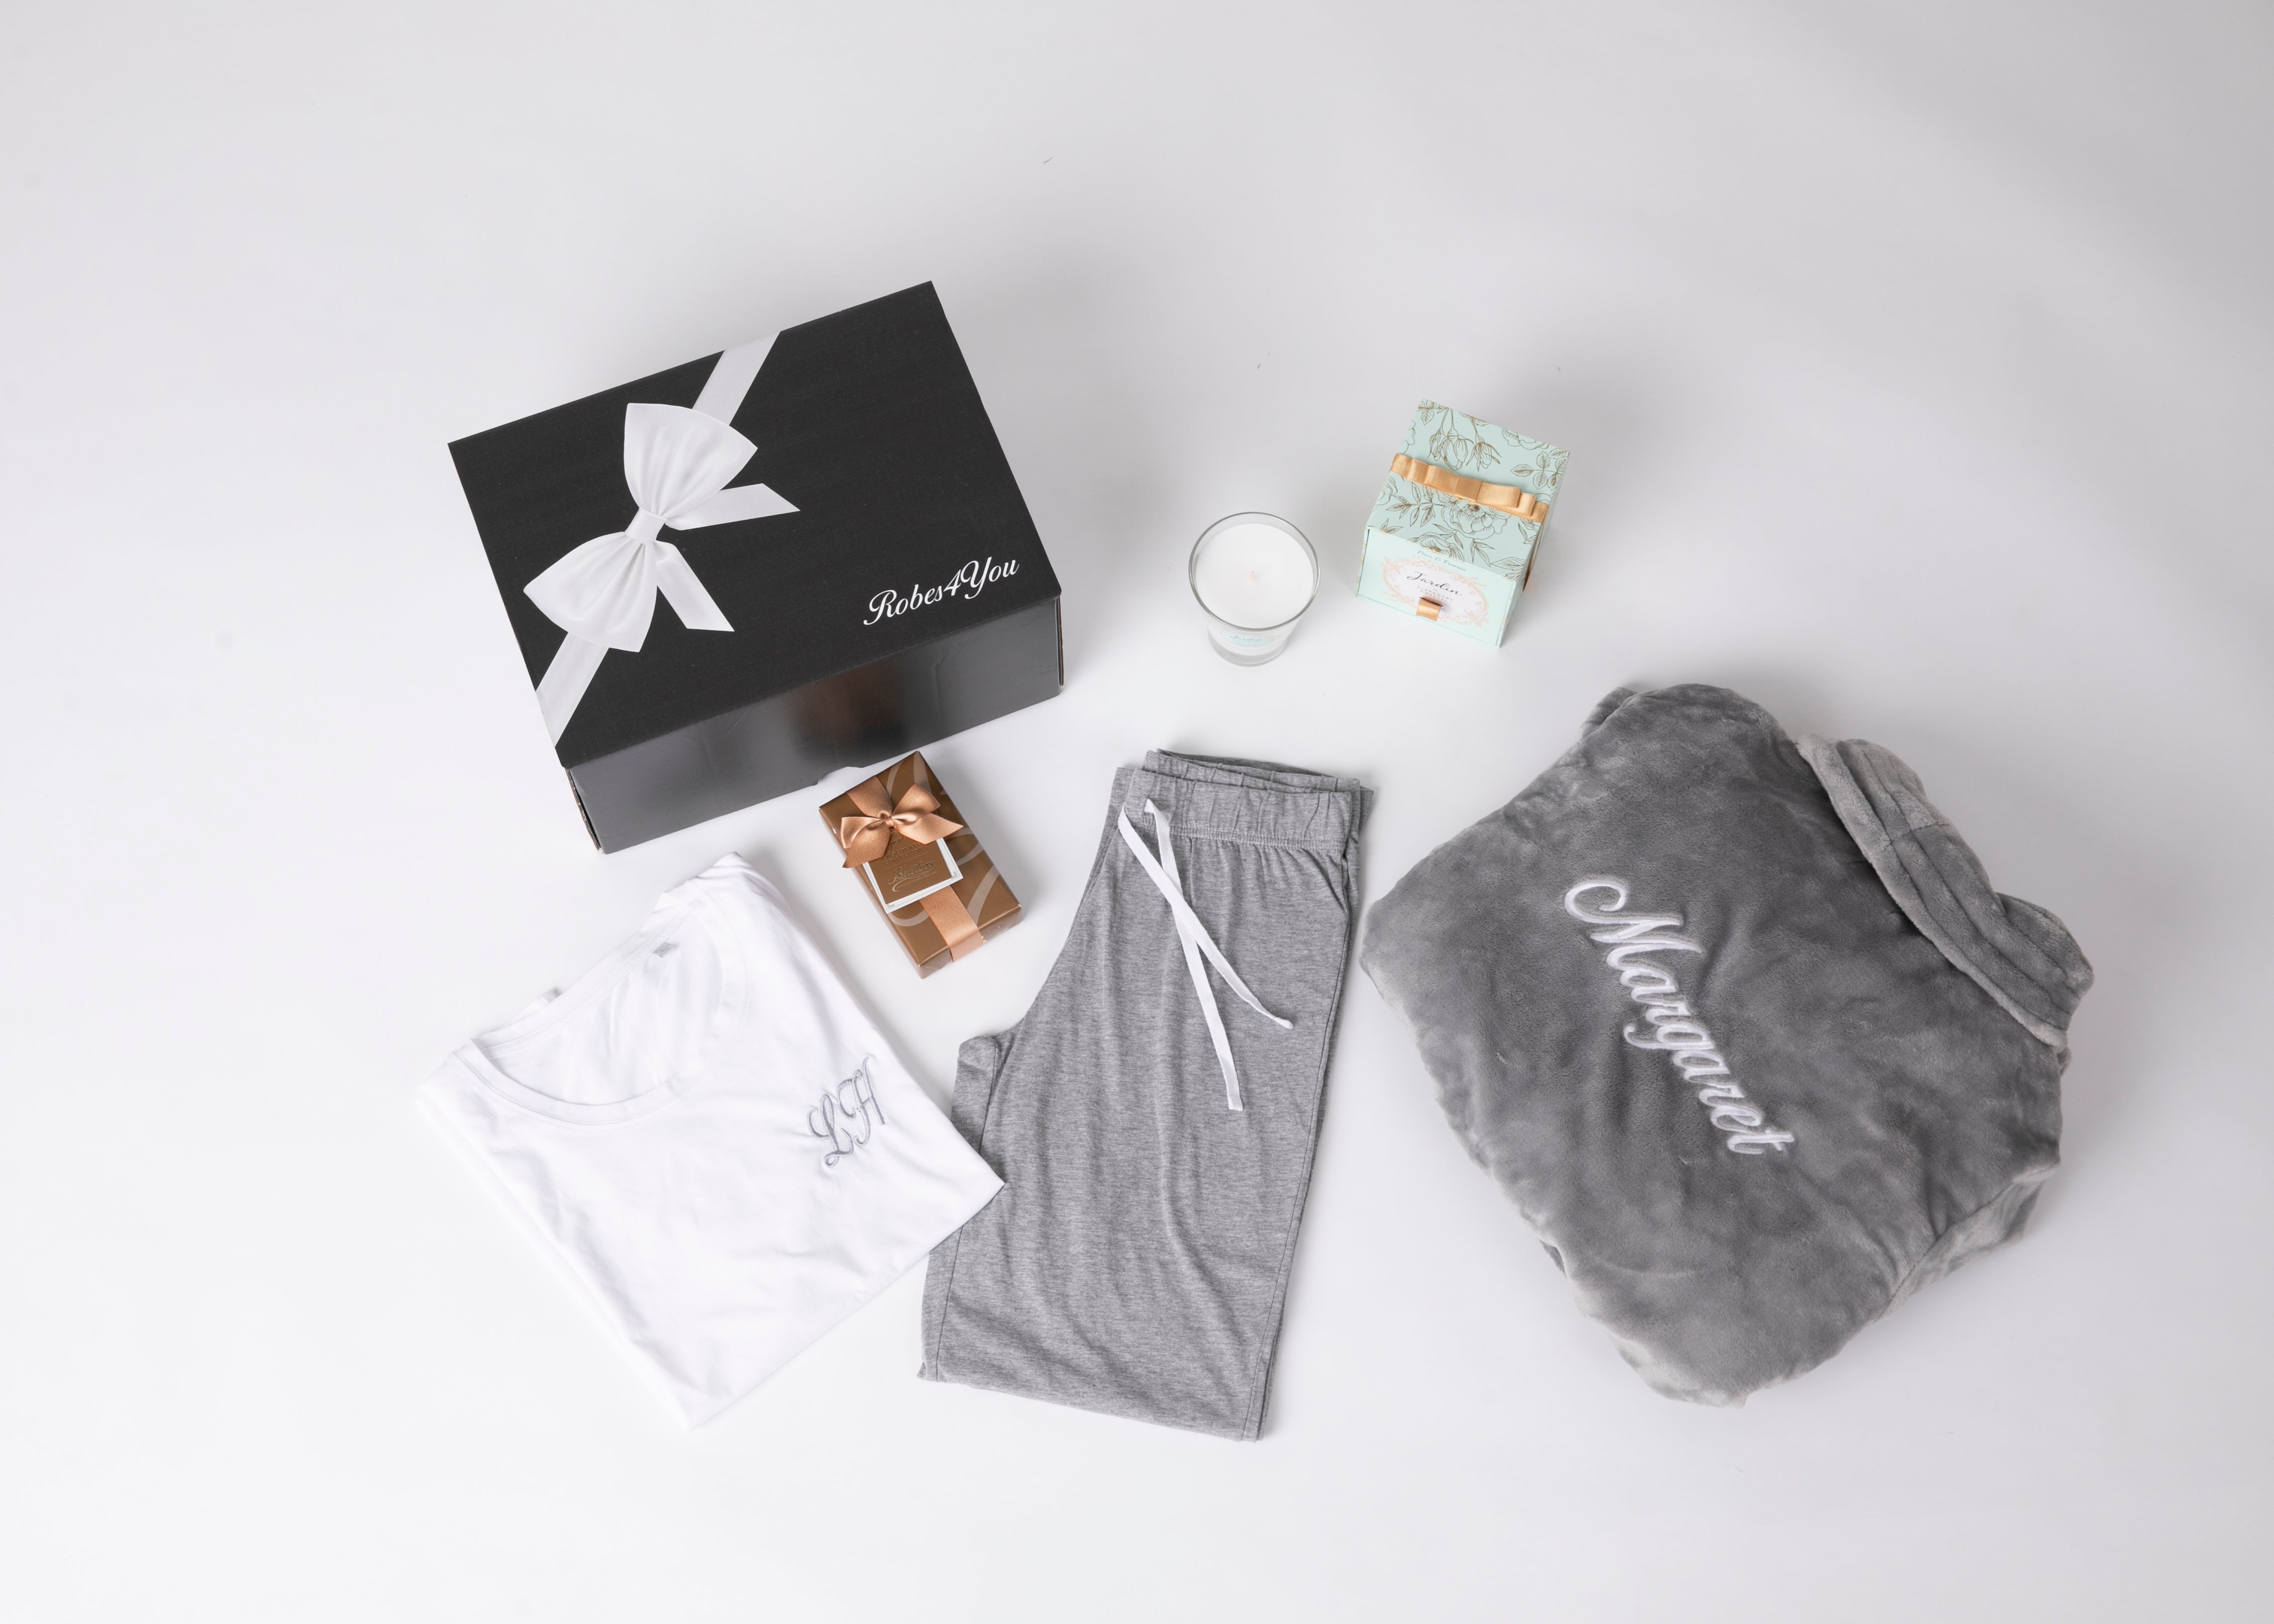 Luxurious Soft Fluffy Robe Hamper & Grey Long Cotton Pyjamas & Chocolates and Candle presented in a gift box